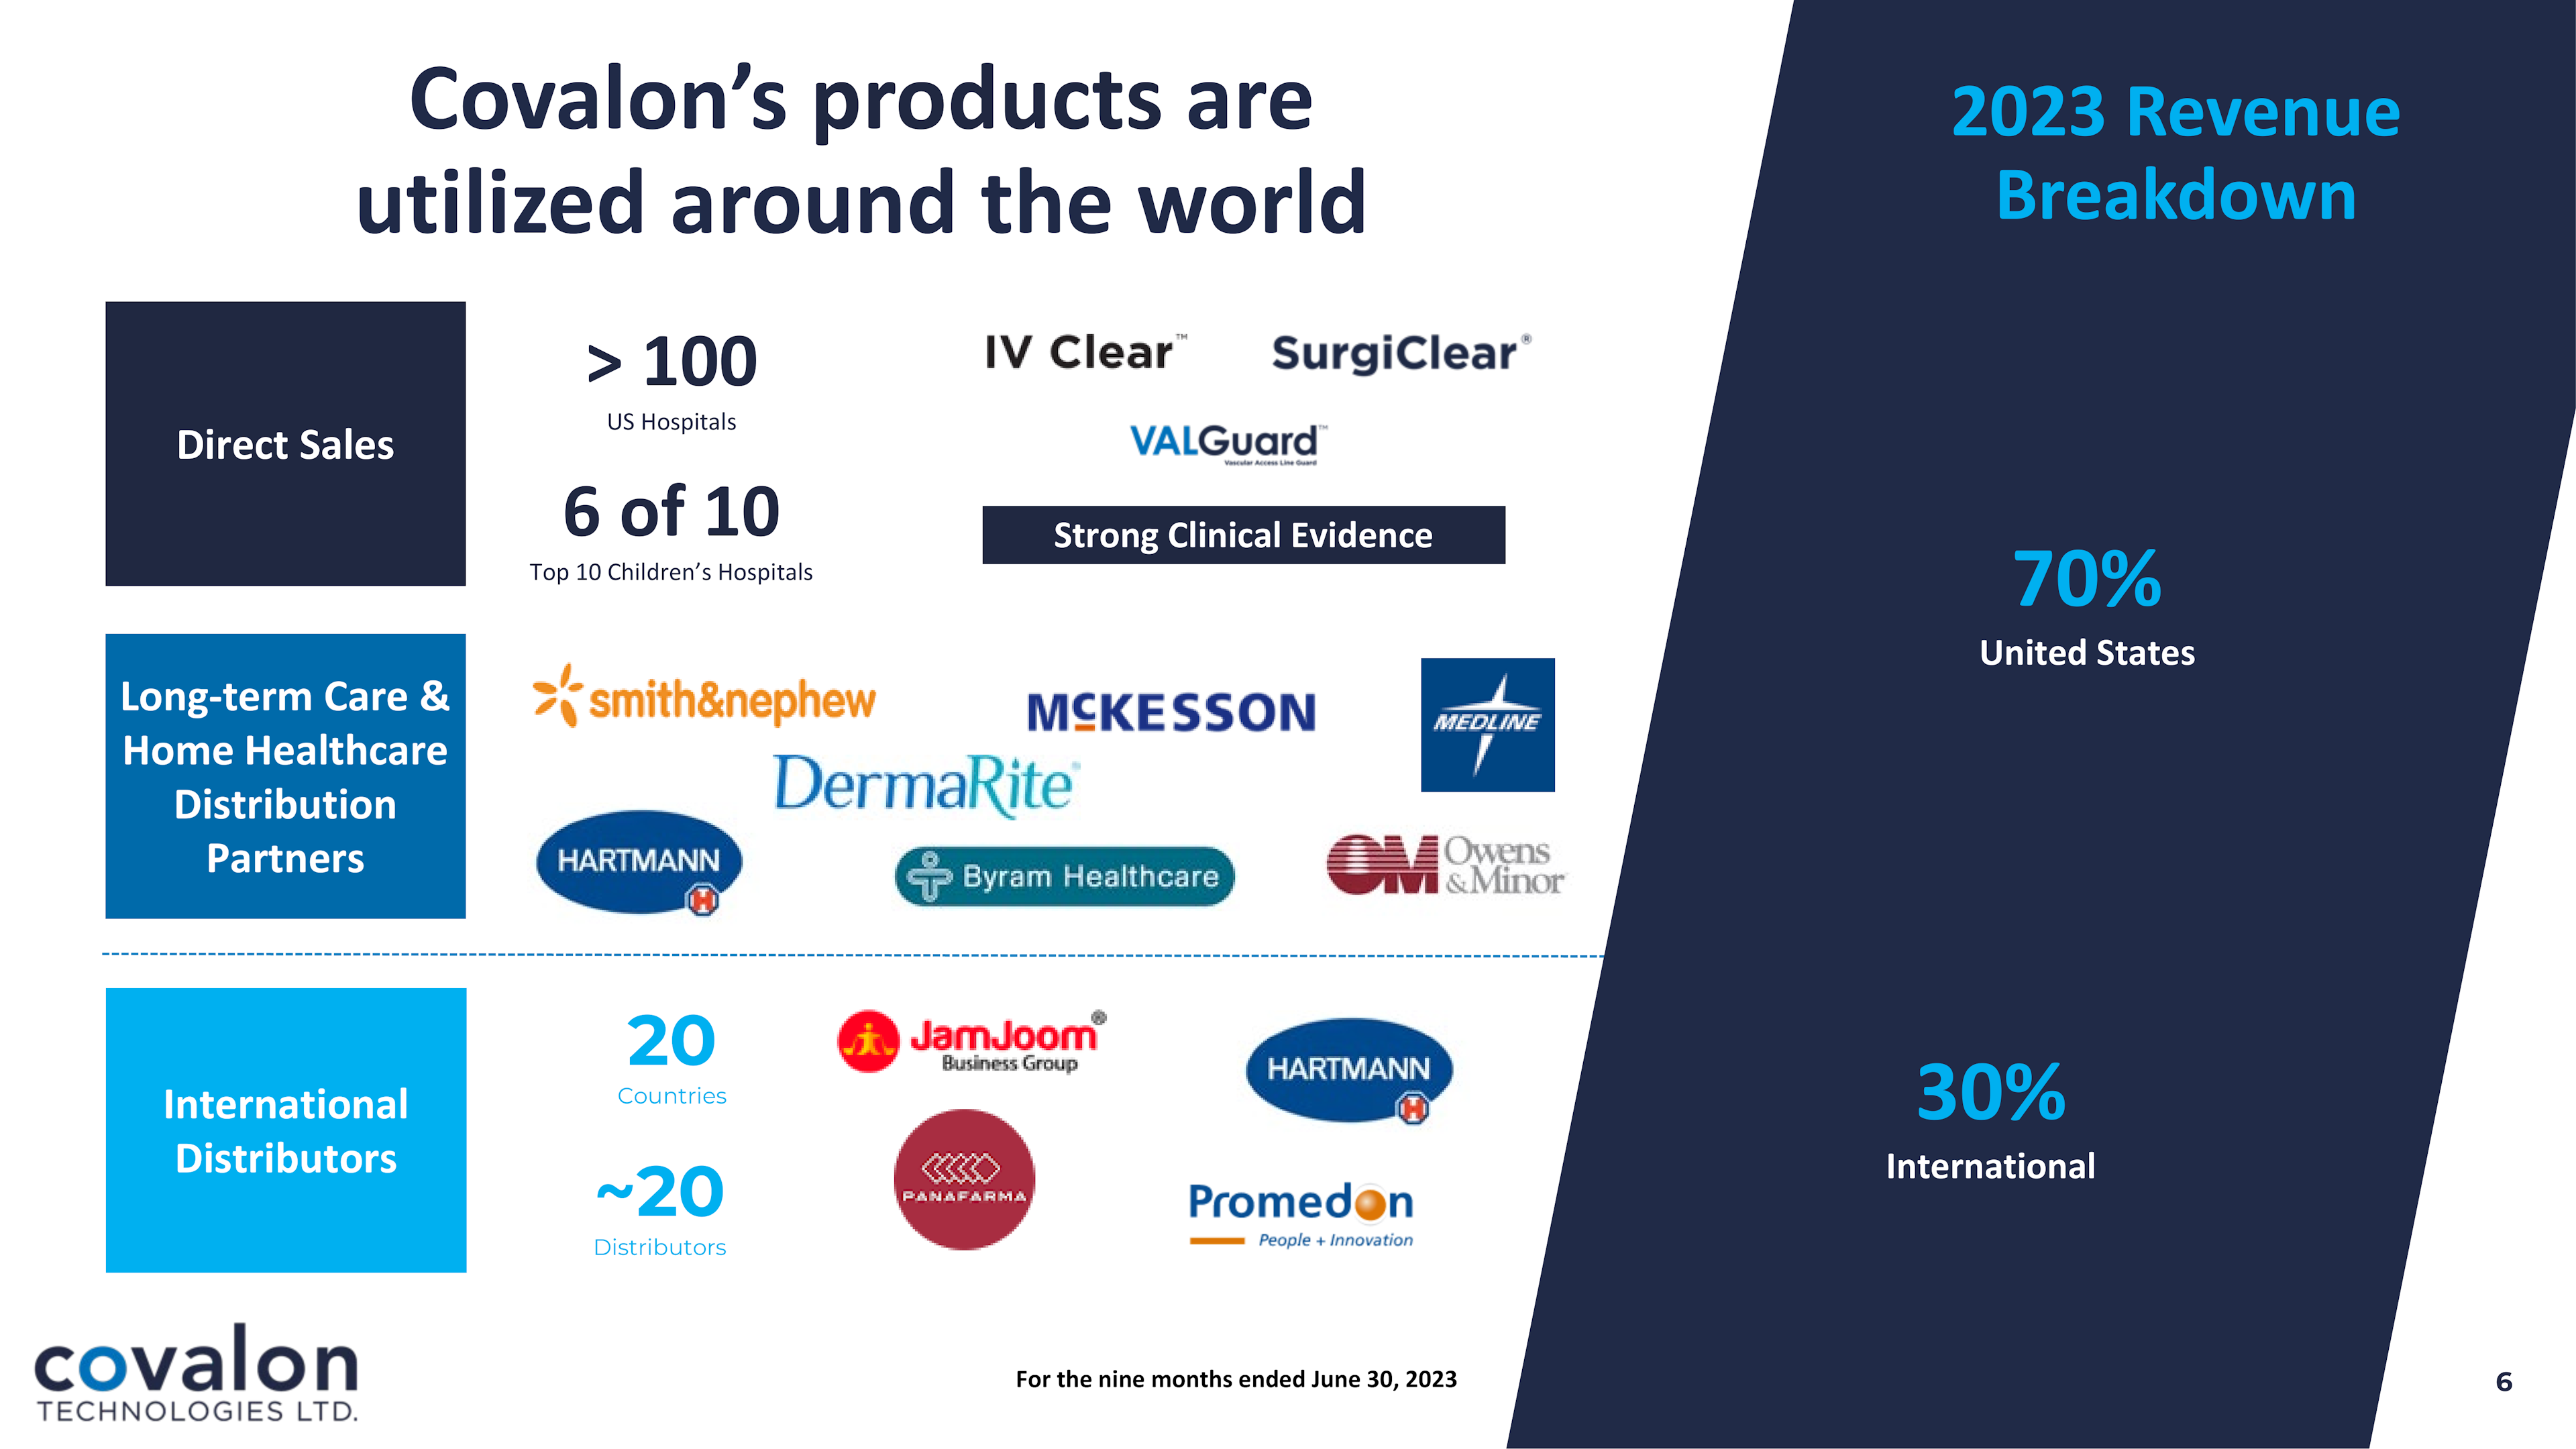 Covalon's products a